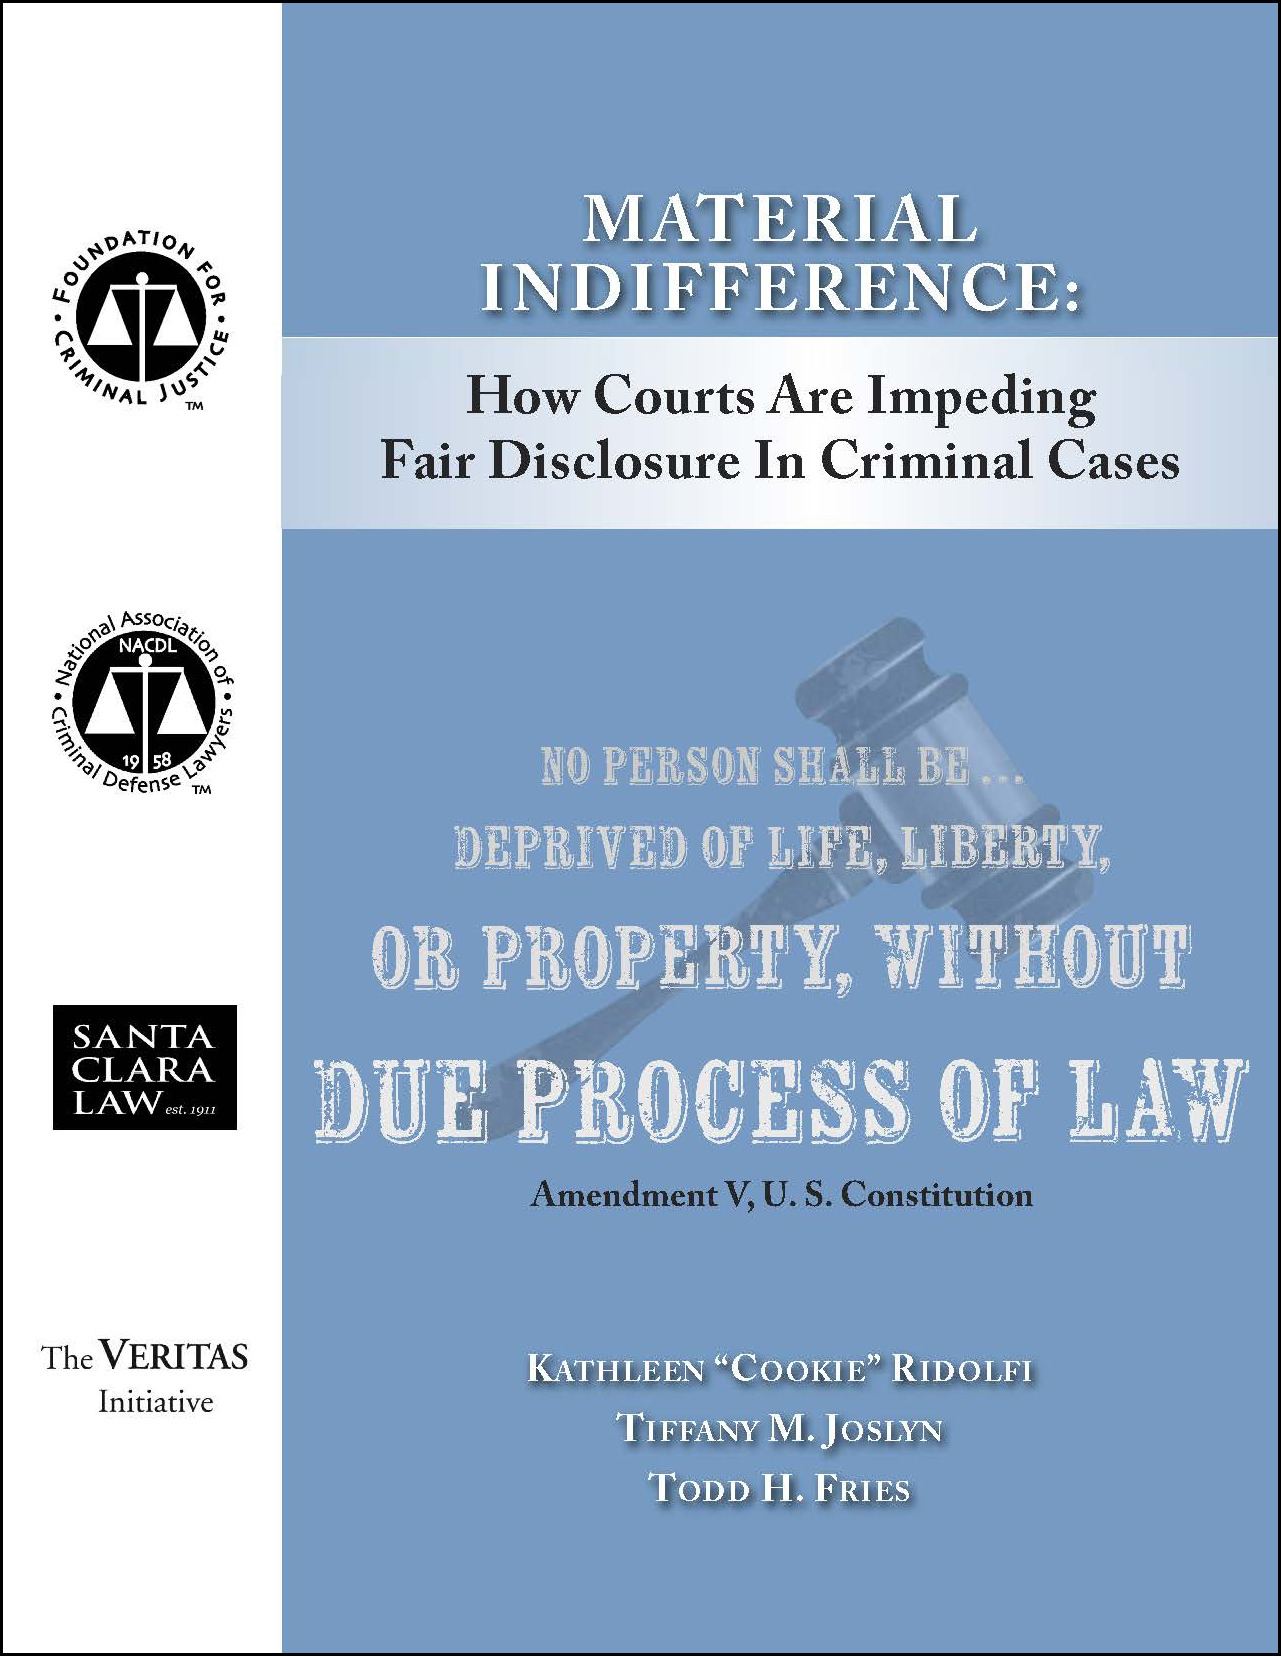 Cover for NACDL report Material Indifference: How Courts Are Impeding Fair Disclosure in Criminal Cases